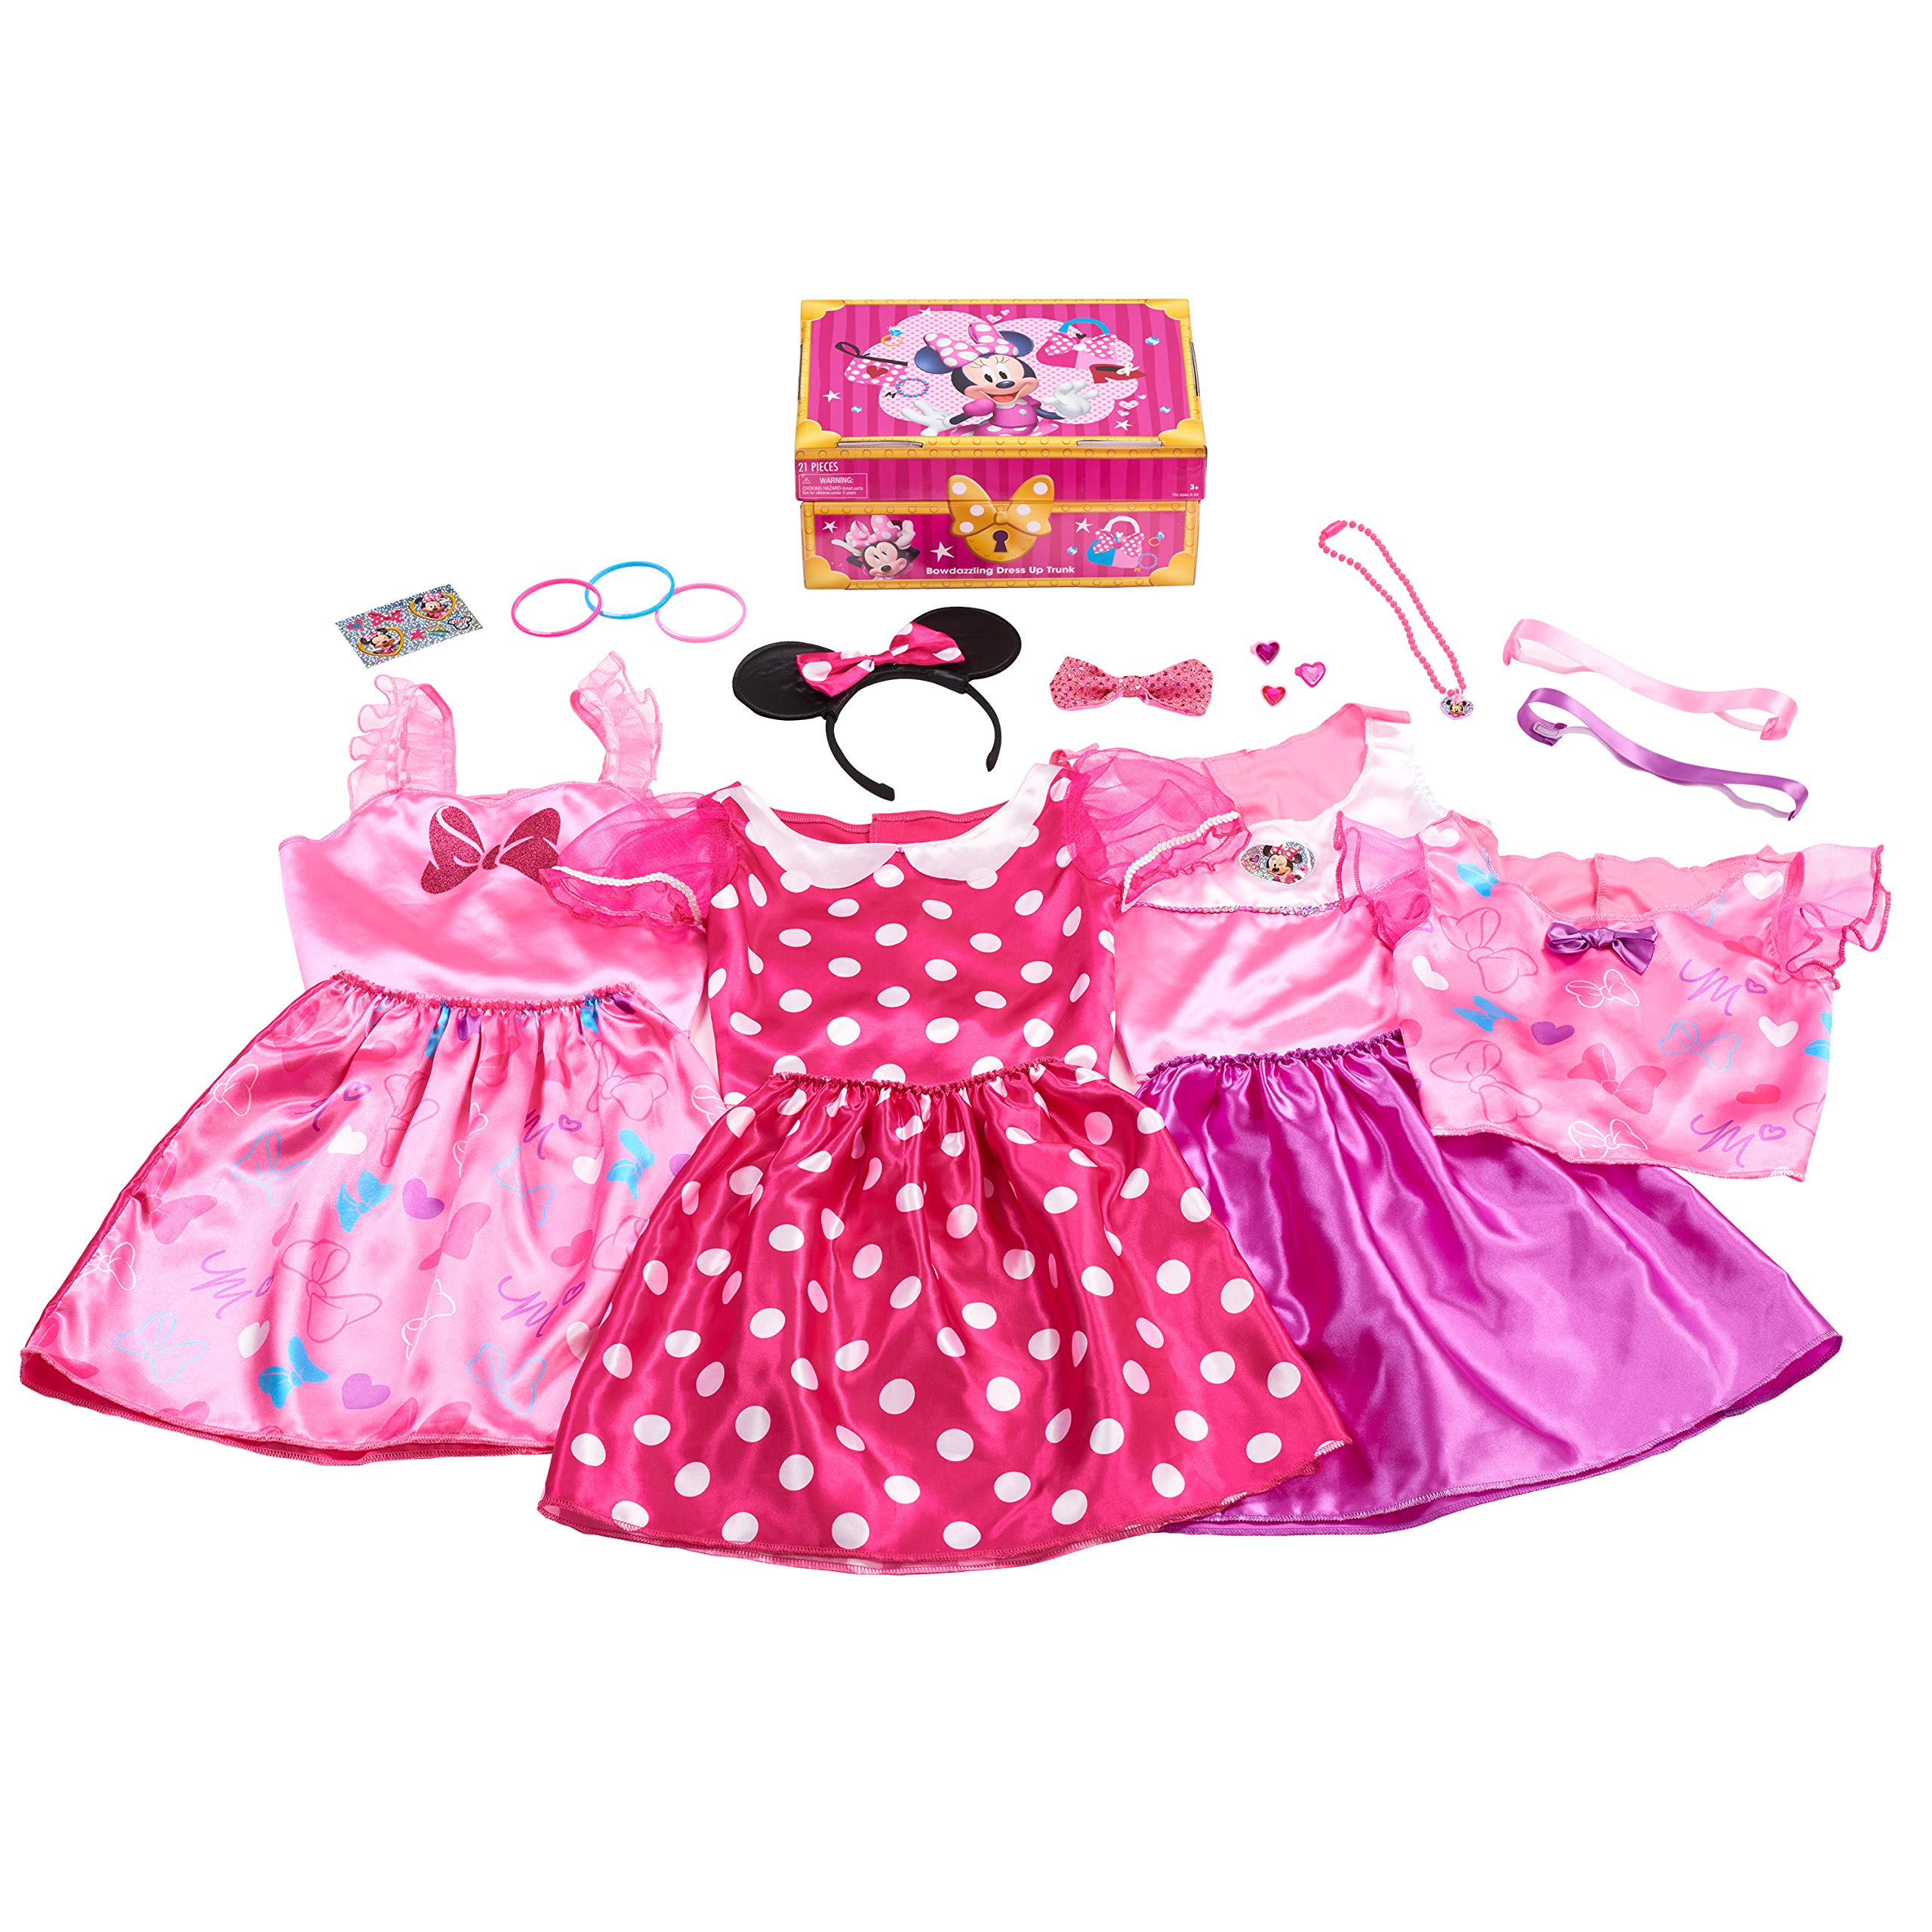 Minnie Mouse Disney Junior Minnie Mouse Bowdazzling Dress Up Trunk Set, 21 Pieces, Size 4-6x,  Exclusive, by Just Play